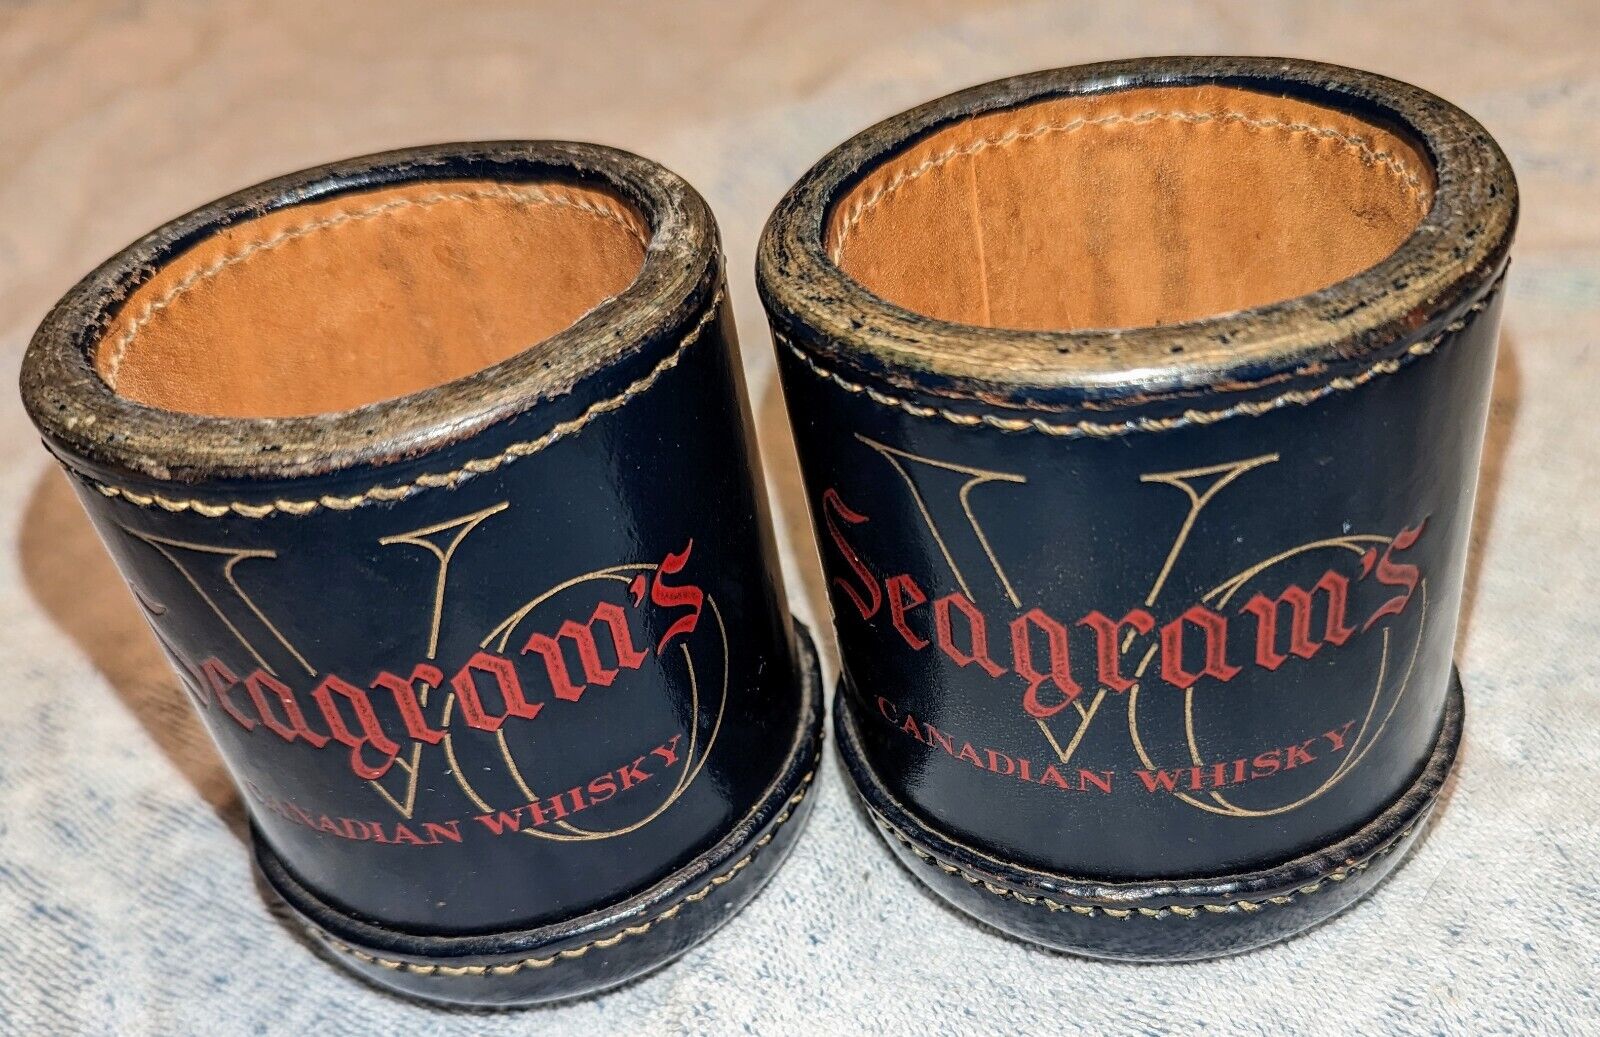 2 Vtg Seagram's VO Canadian Whiskey Leather Dice Cups Stitched Made in Hong Kong